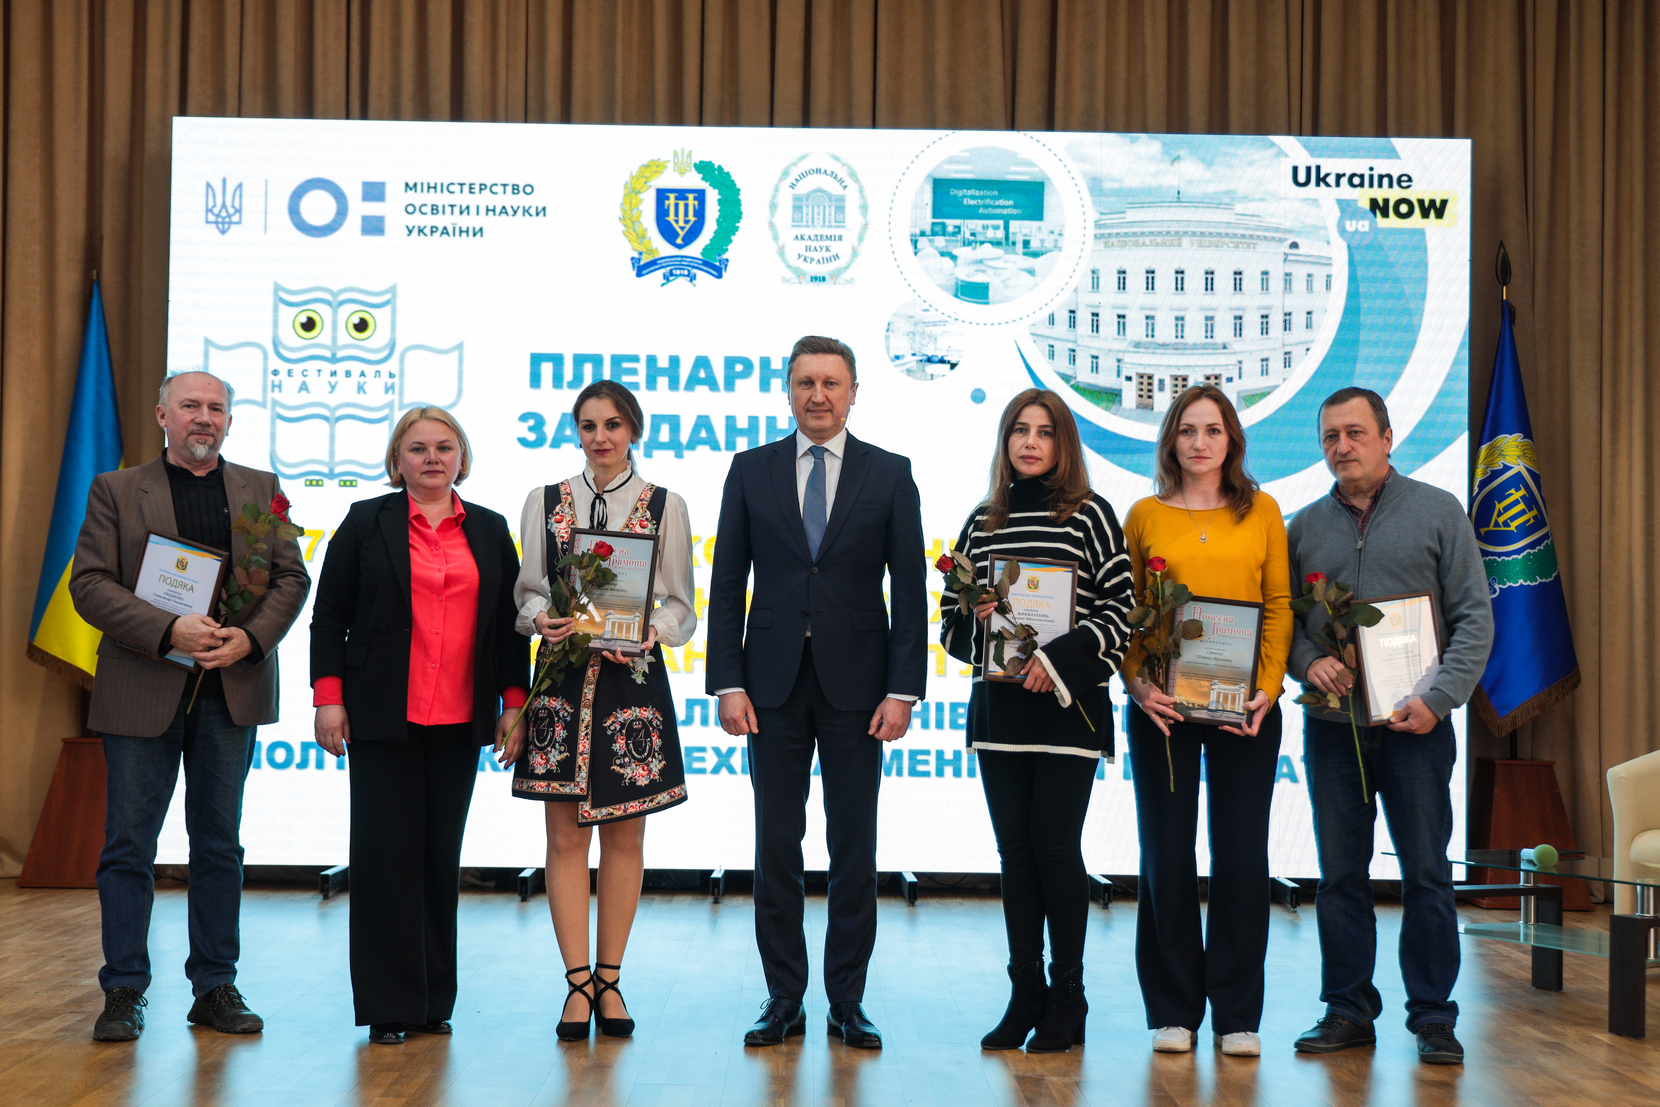 University scientists are awarded by Poltava Regional Council and the Shevchenkivskyi District Council in Poltava for their fruitful scientific and pedagogical activity